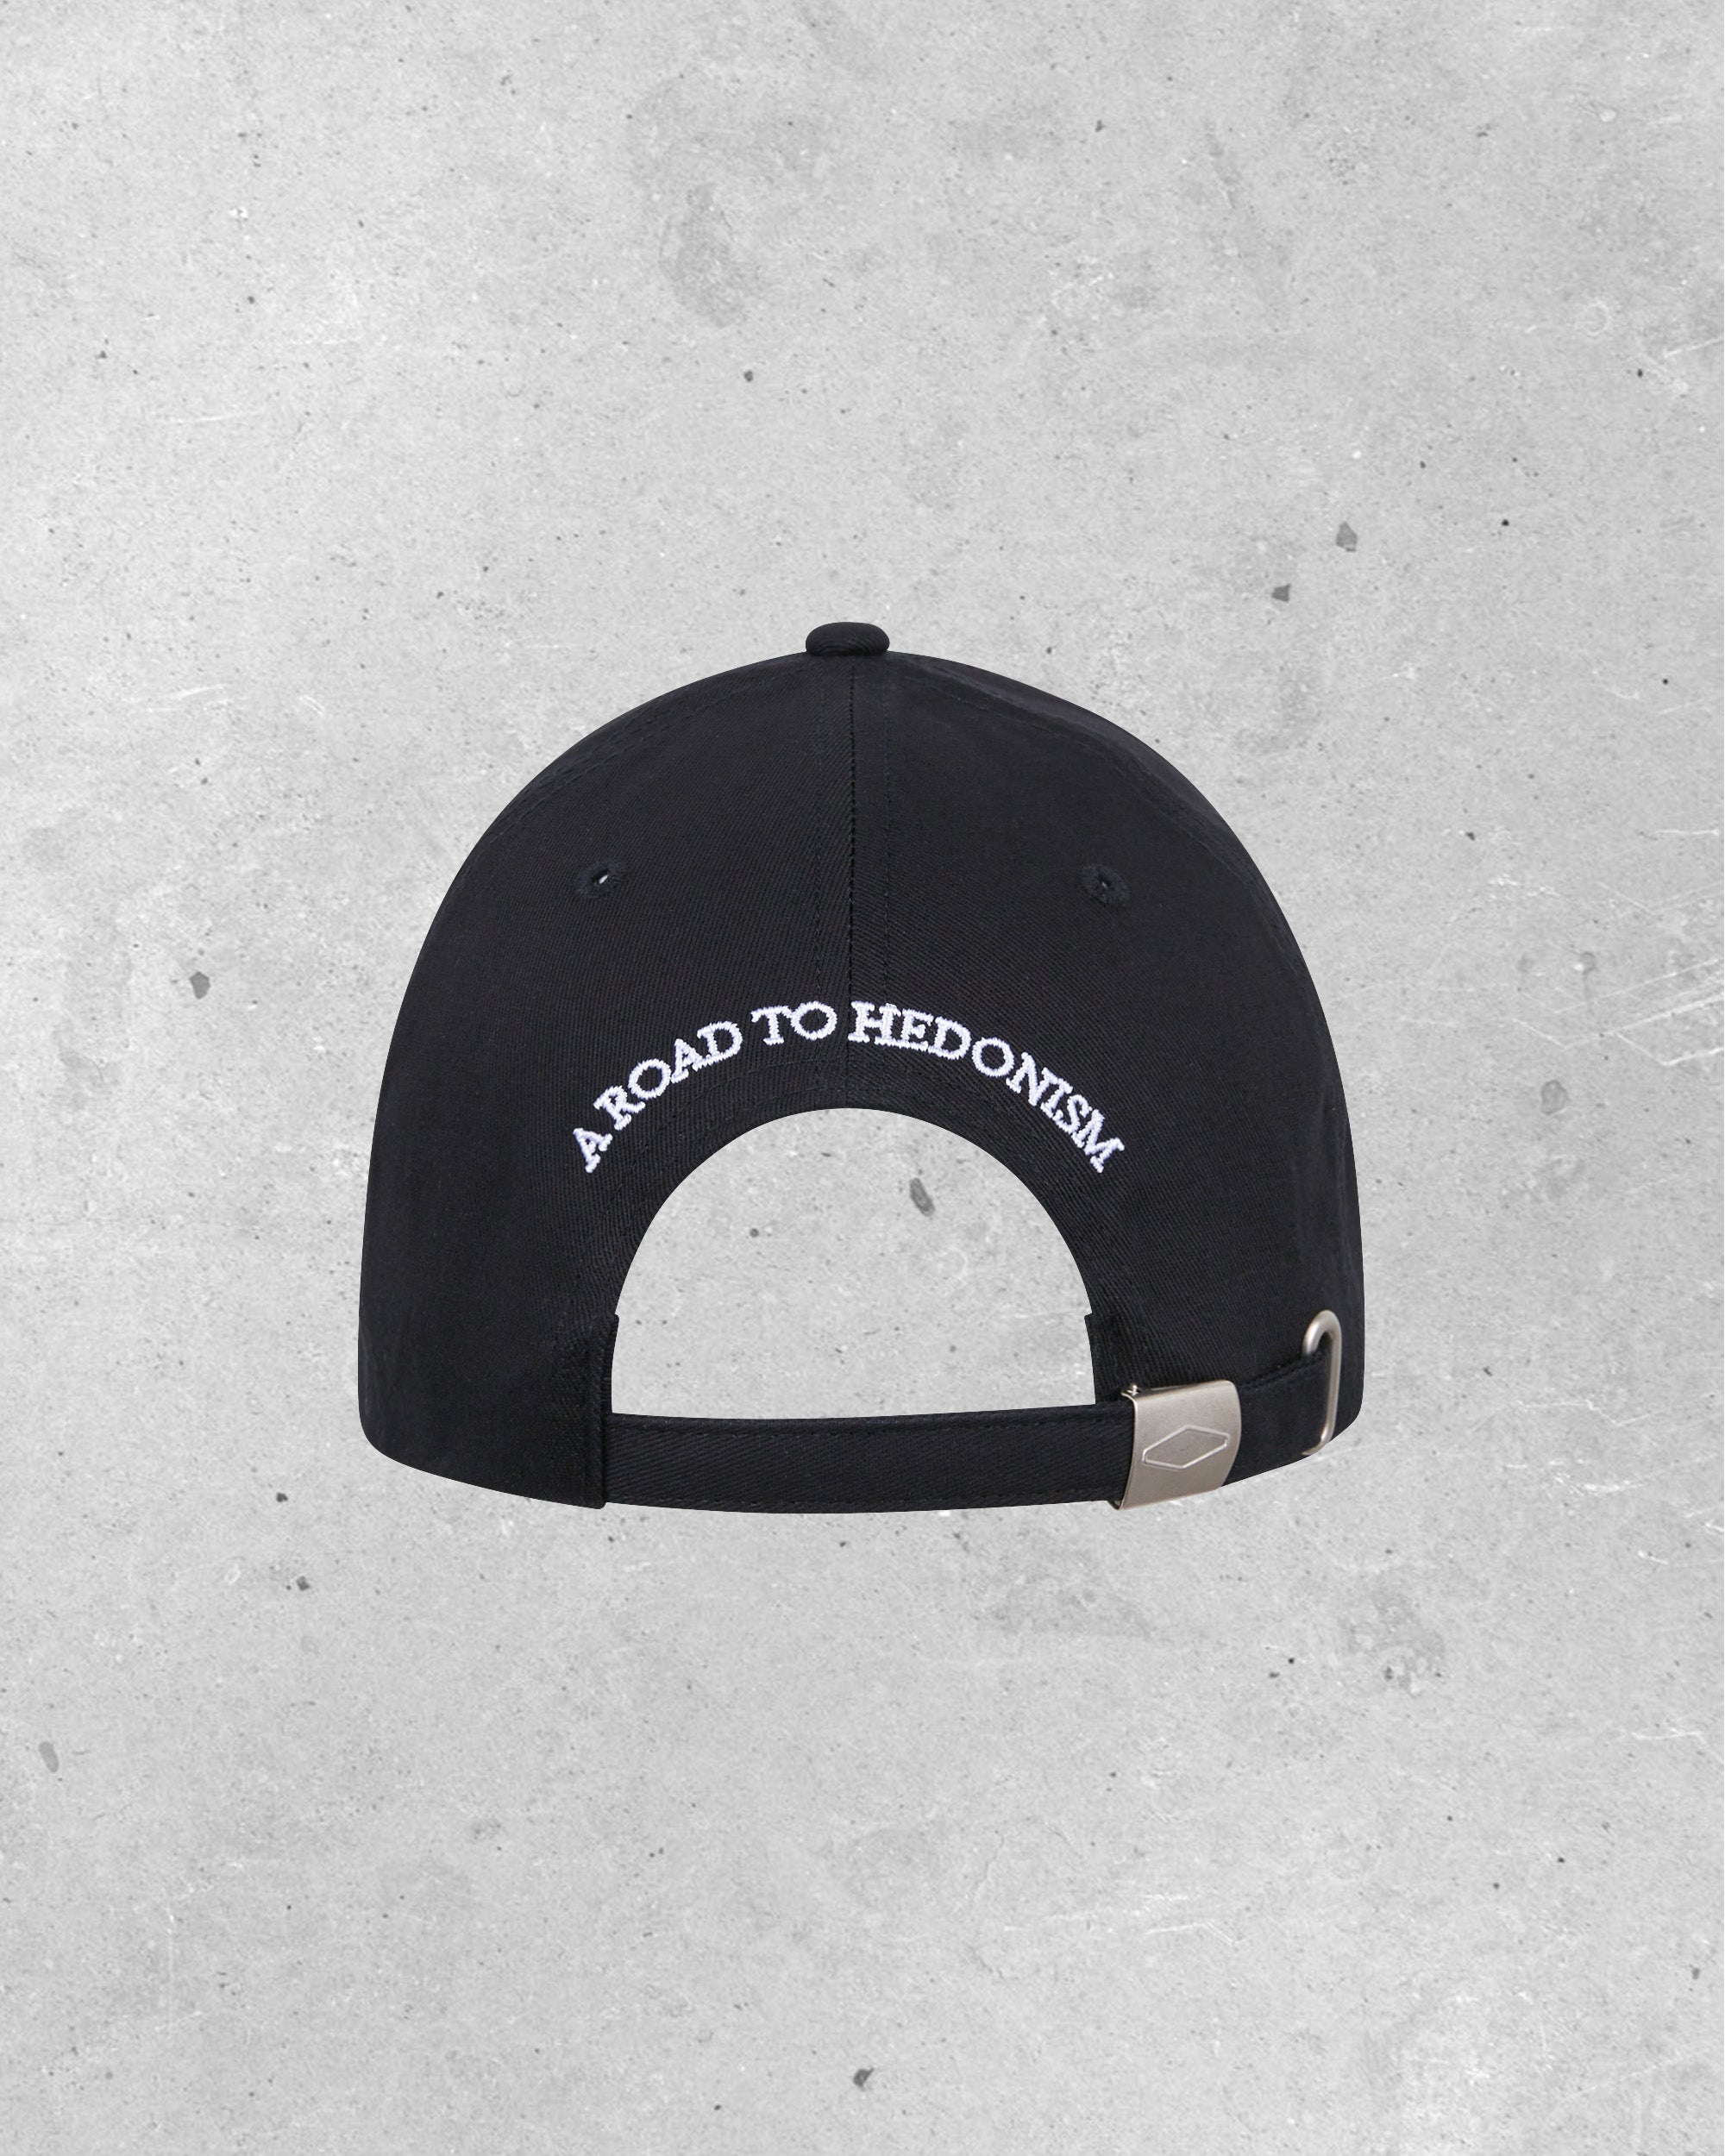 Cap Hedonic - a story of [re]creation - solid black